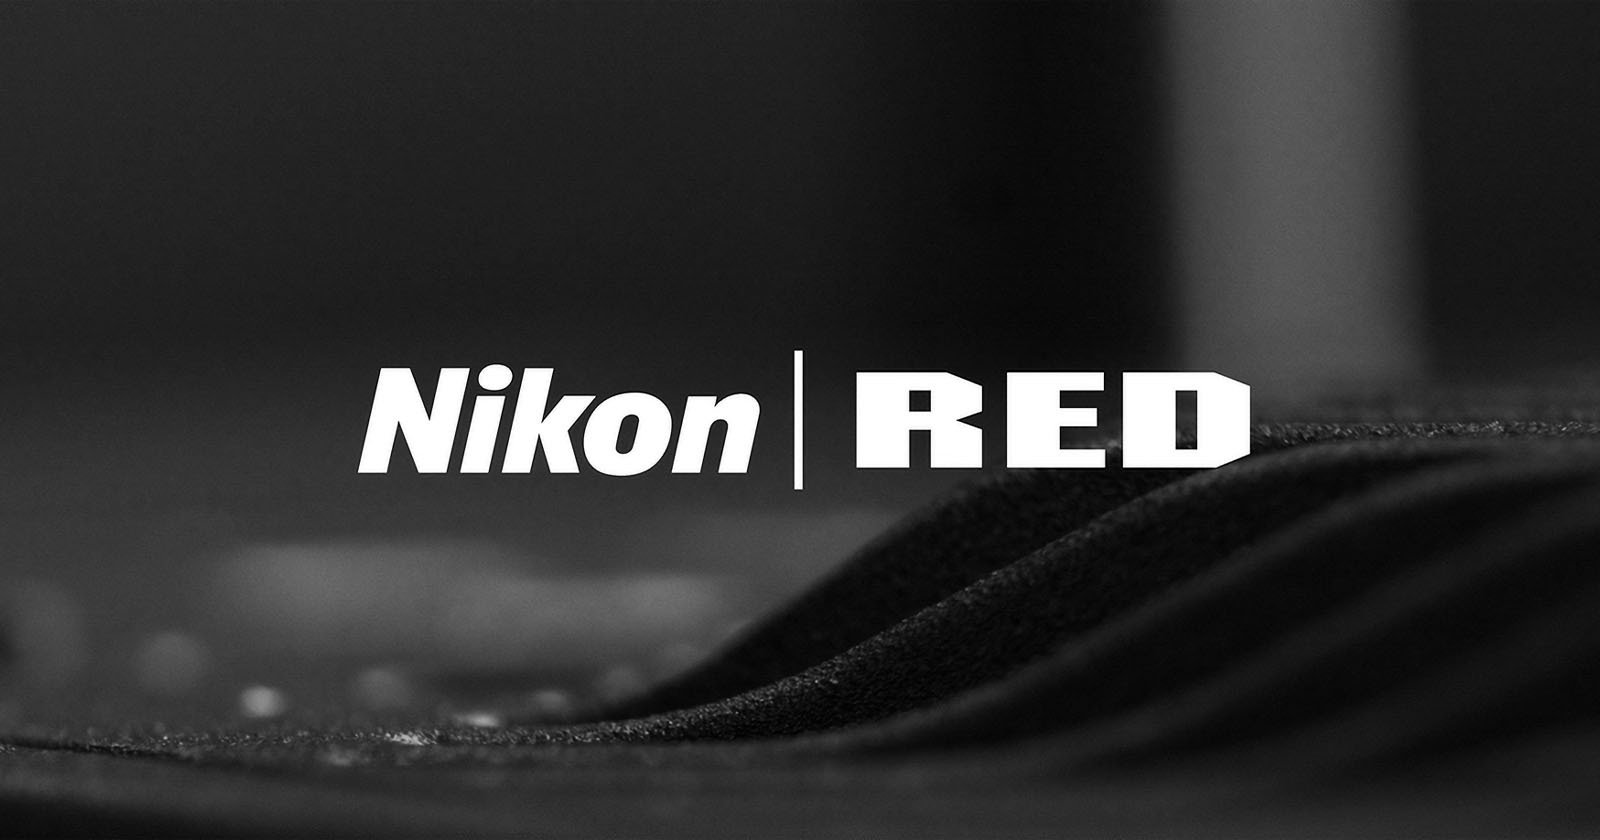 Nikon Bought RED for Just $85M